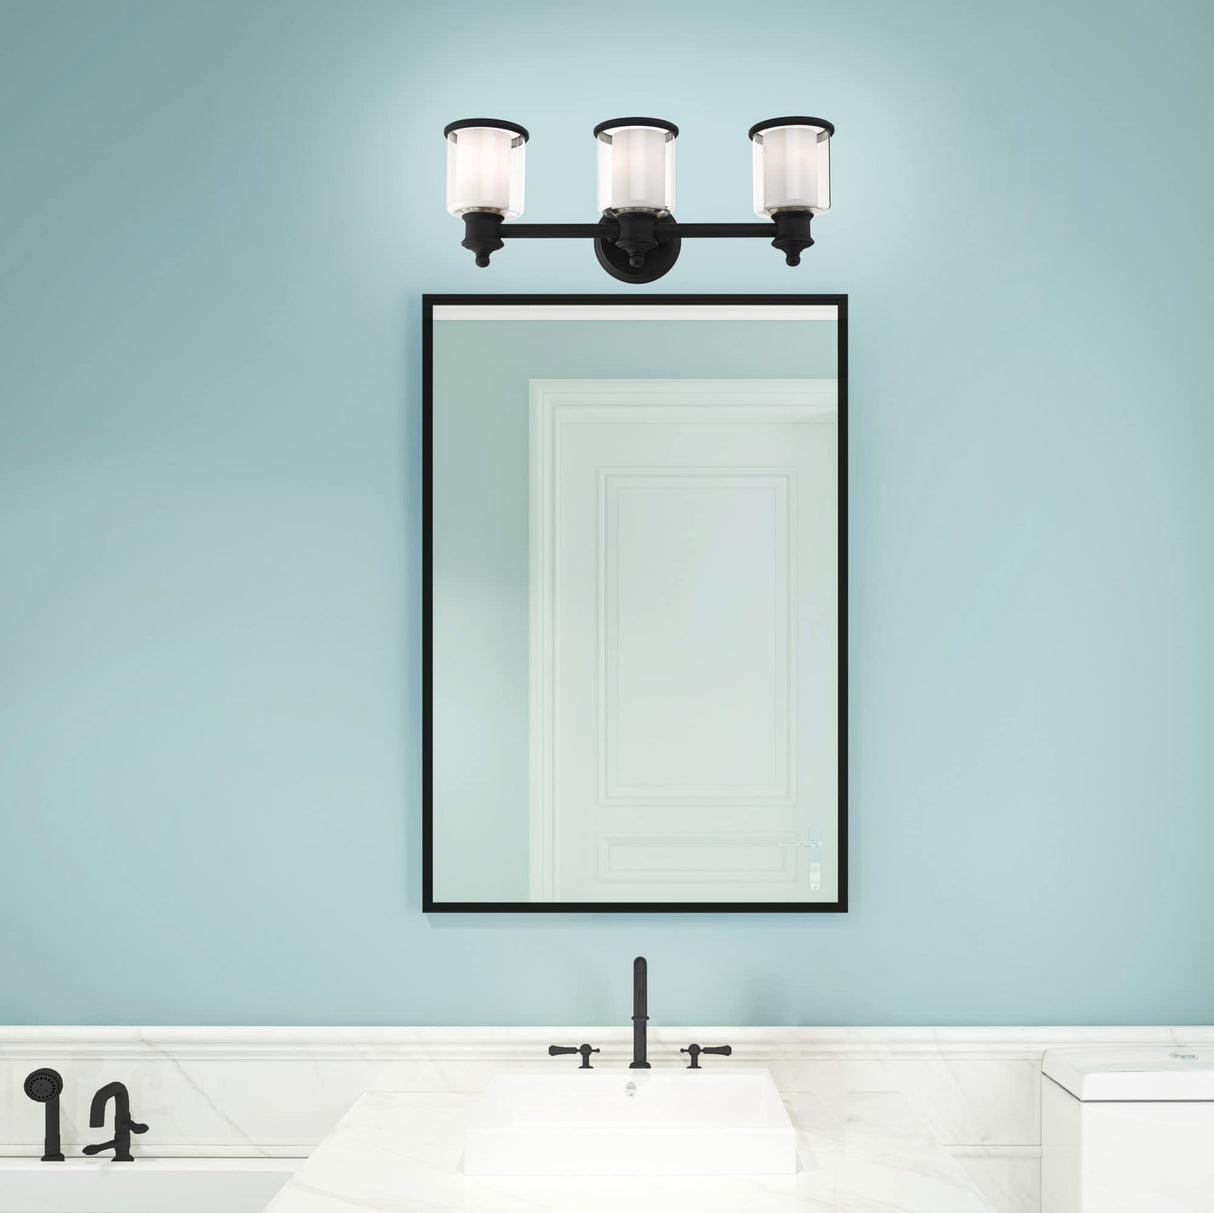 Livex Lighting 40213-35 Middlebush Collection 3-Light Bathroom Vanity Light with Double Shaded Hand Crafted Glass Shades, Polished Nickel, 23.5 x 6.5 x 9